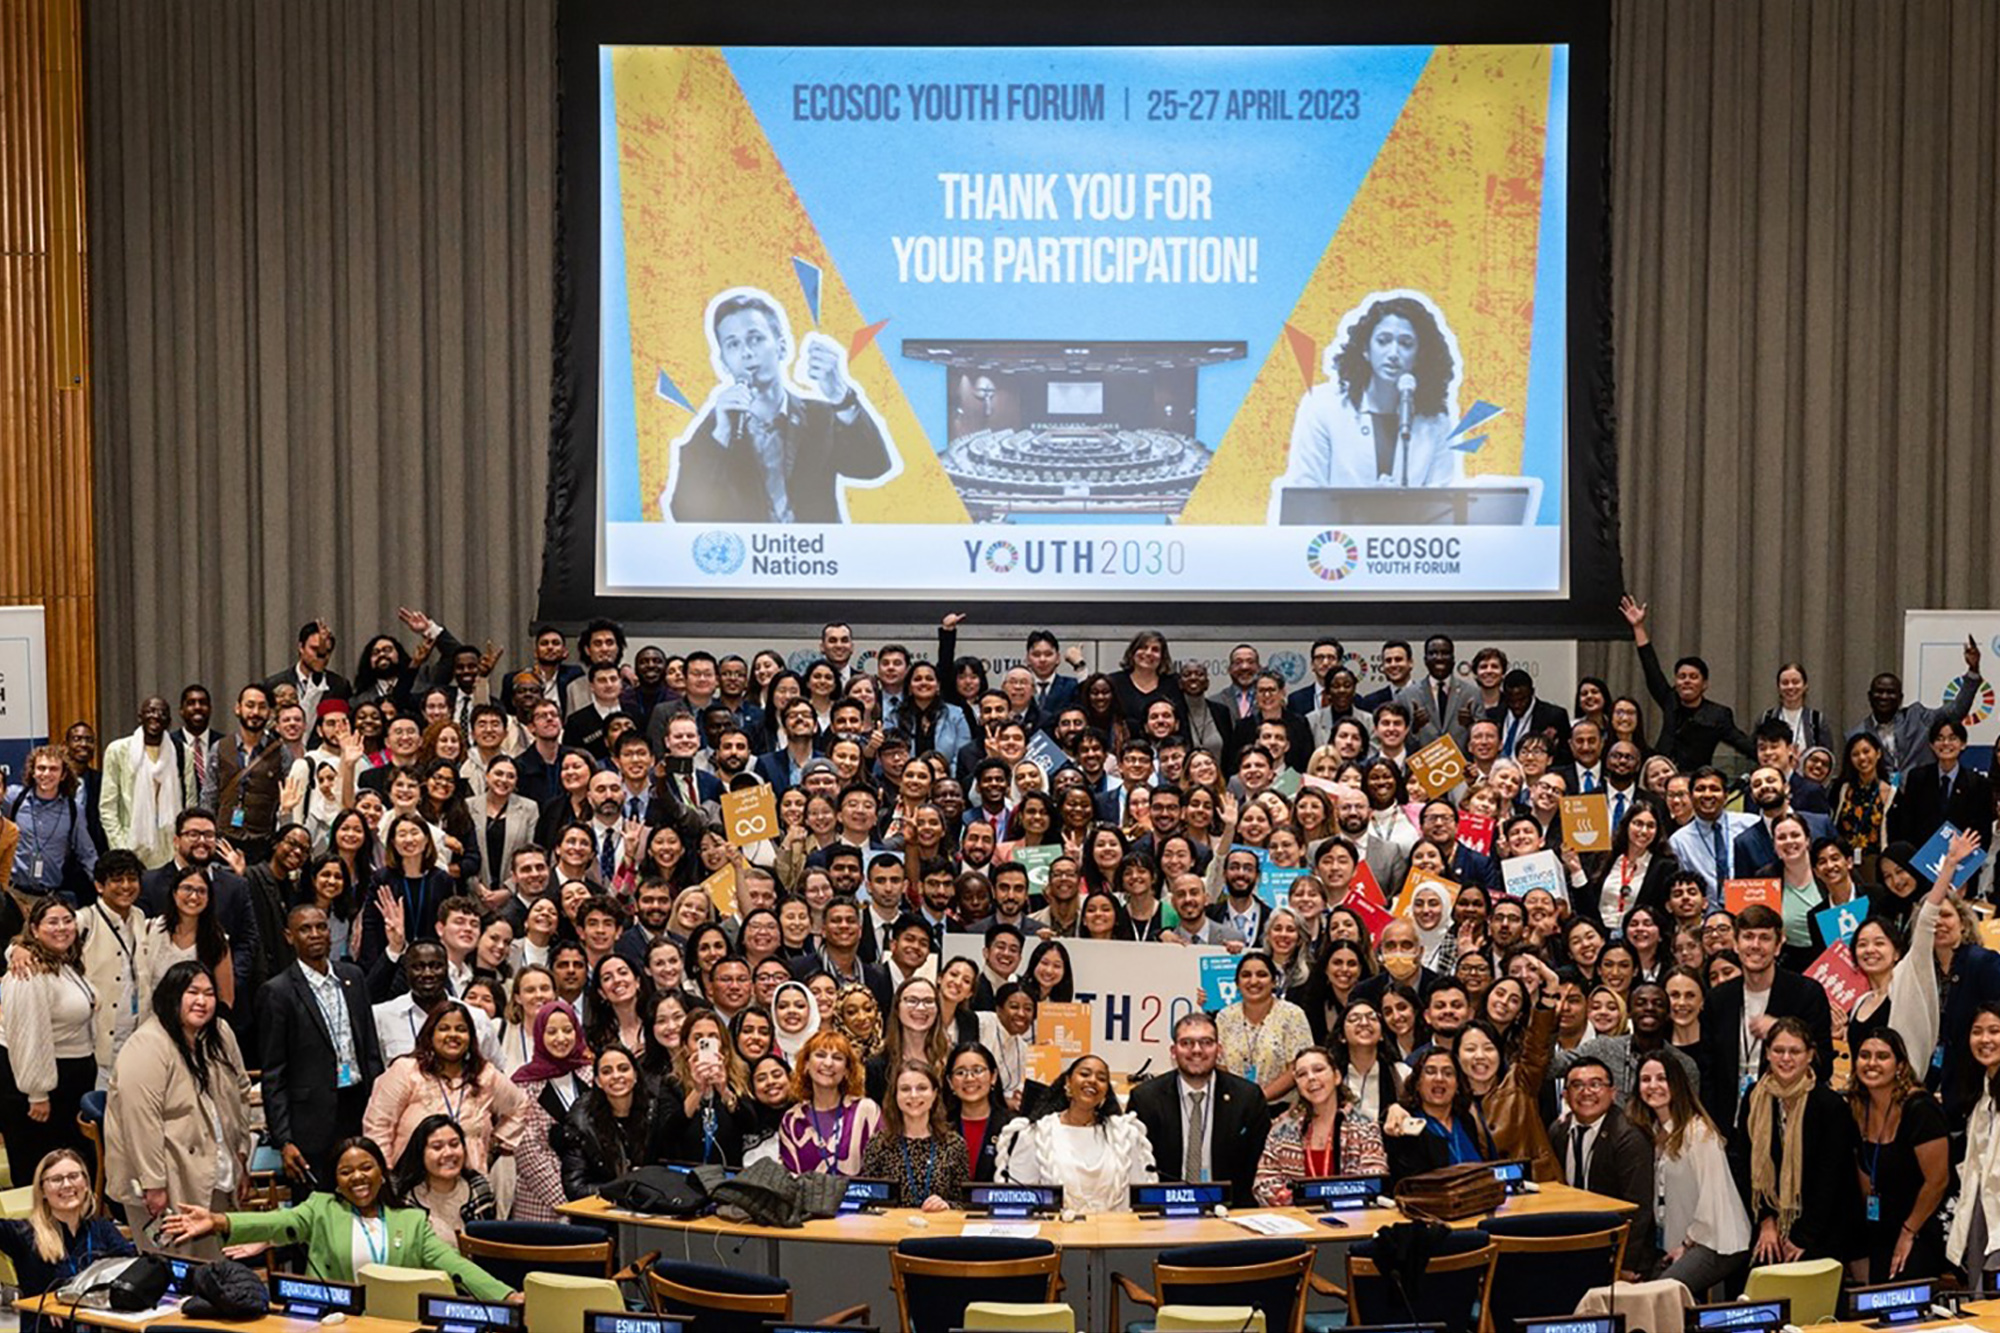 Young leaders from around the world at the ECOSOC Youth Forum 2023.